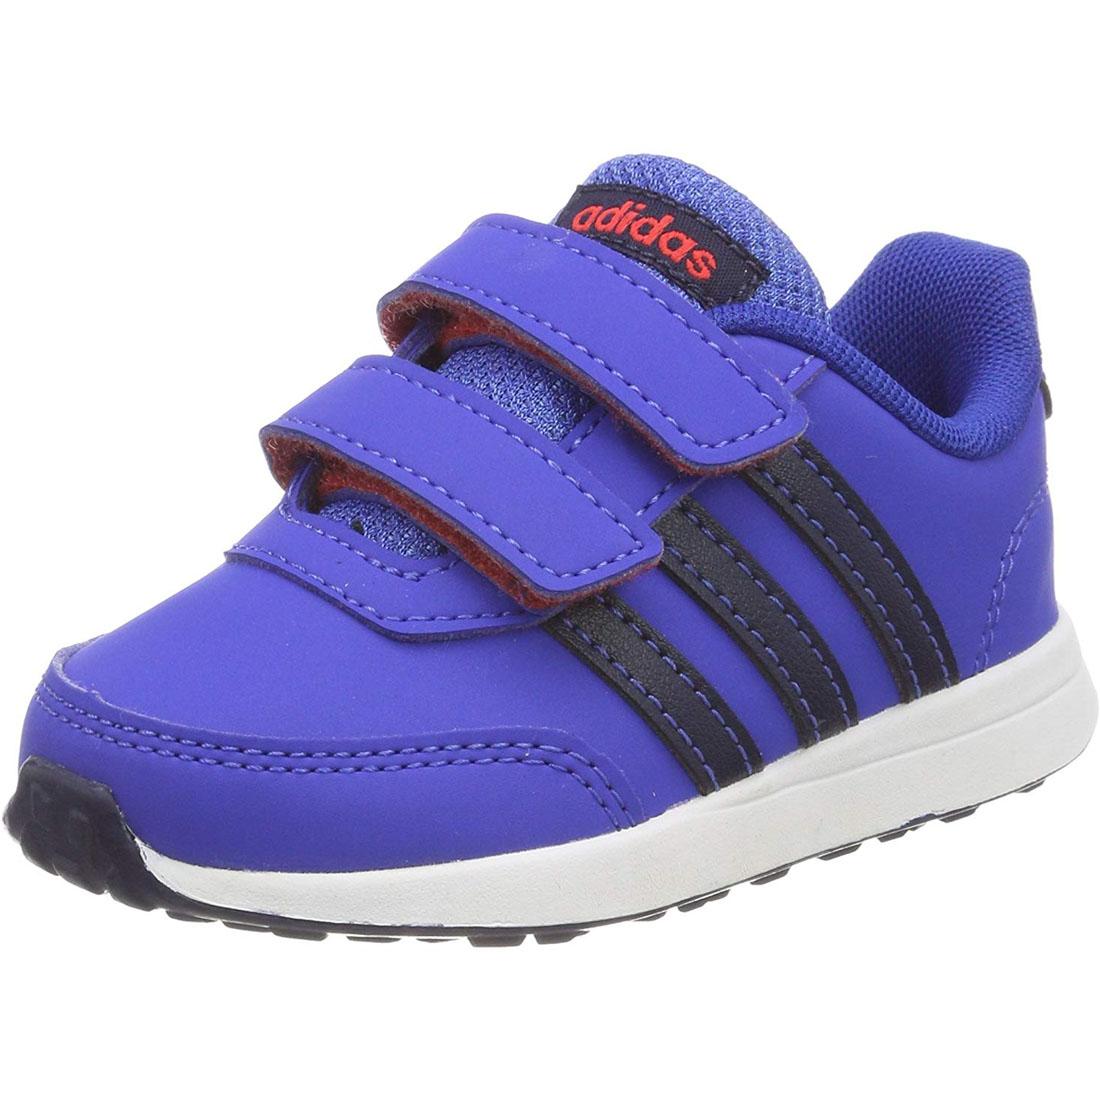 adidas switch infant trainers